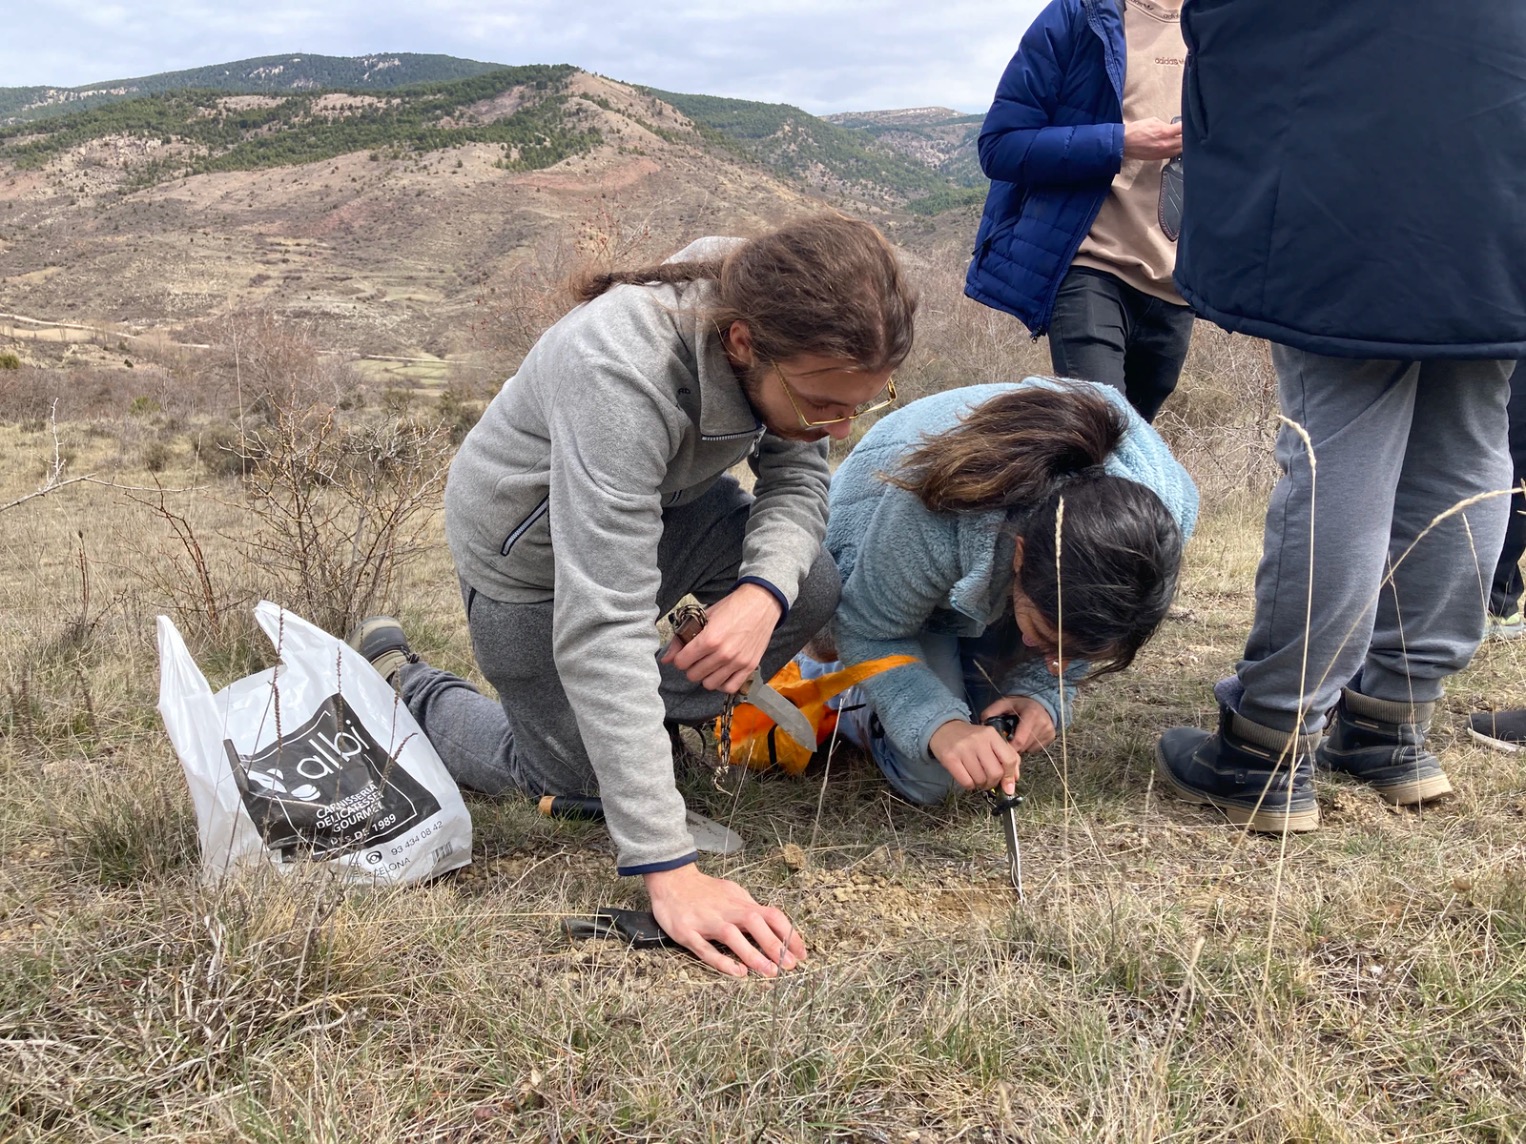 This spring, together with the University of Barcelona and Volterra, Life Terra are working with five students with the bachelor’s degree in Environmental Sciences (UB) to develop a reforestation project in Spain. They visited the project area in Camarena de la Sierra, in the beautiful region of Teruel, to analyse the ecological context, take soil samples, and interview key stakeholders and local people to understand their vision. This was an opportunity for students to get hands-on experience and apply their theoretical knowledge to a real reforestation project. More ?